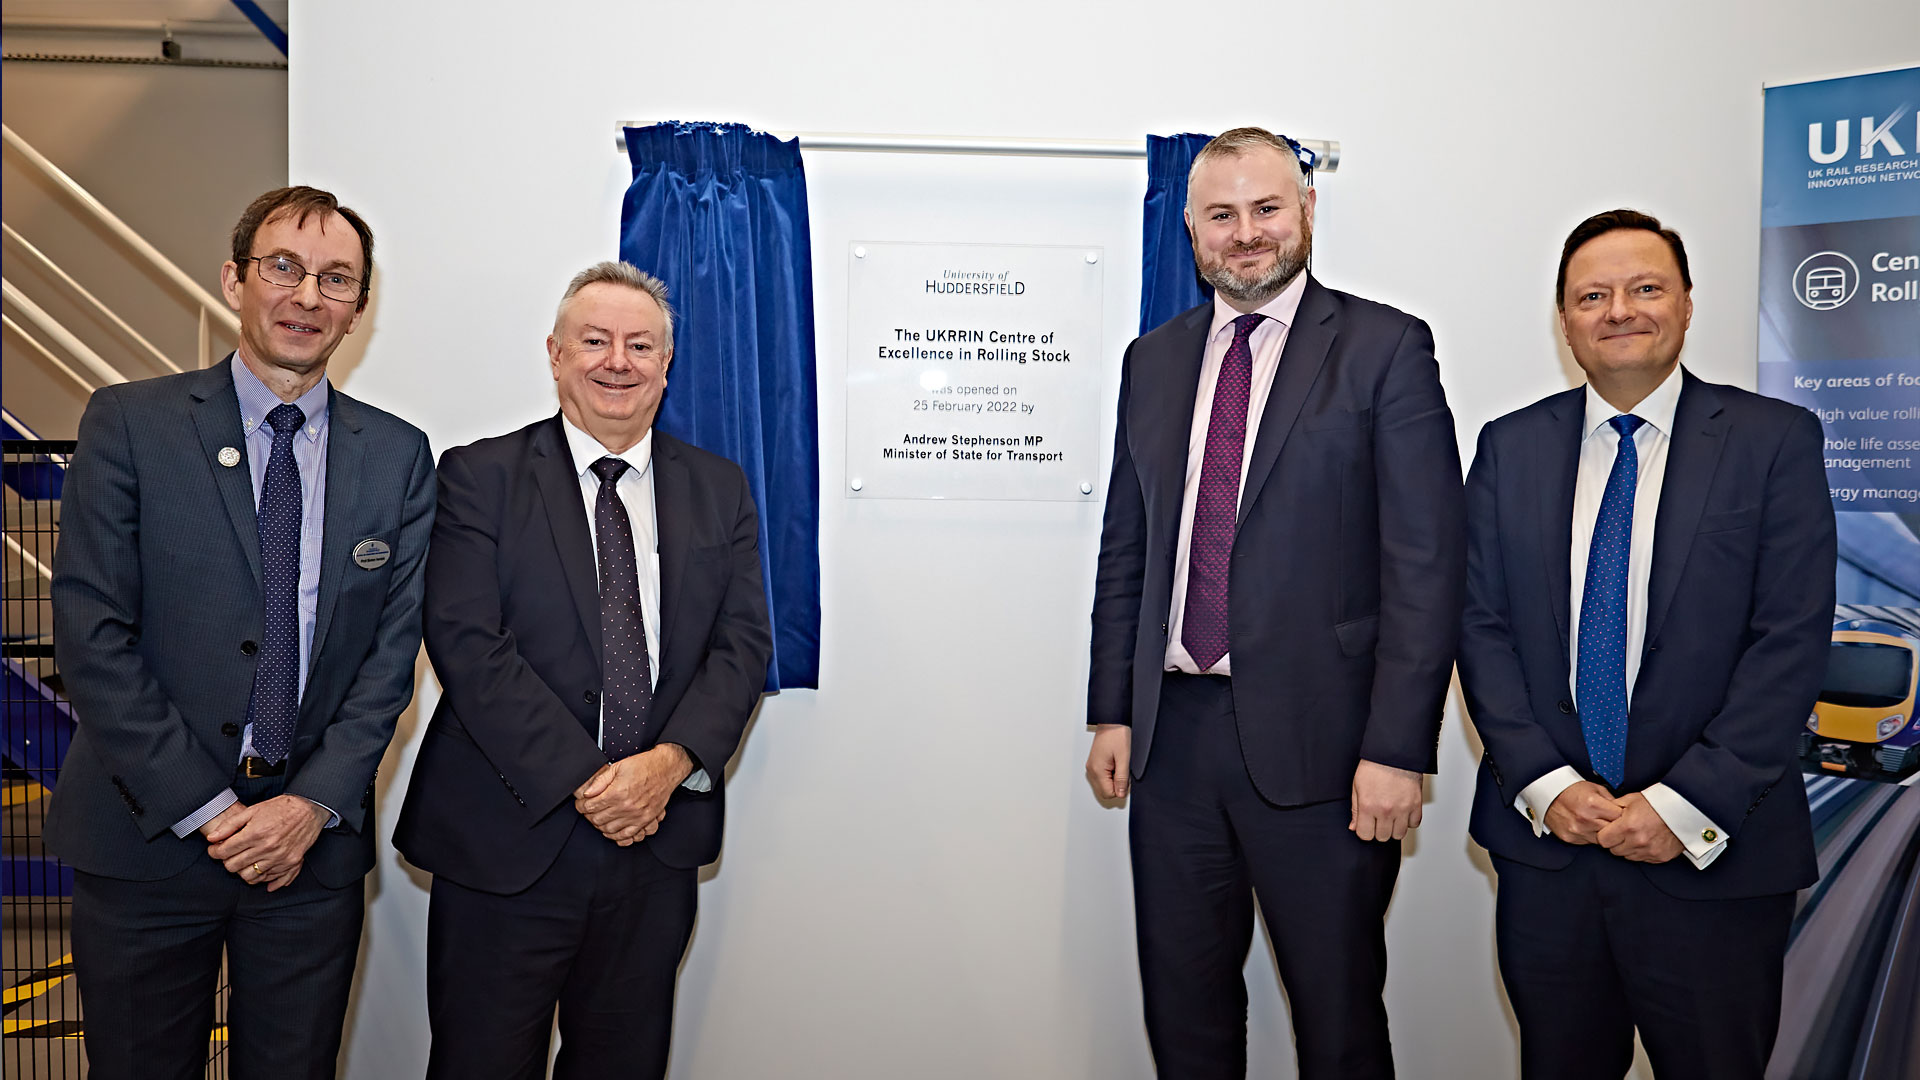 Andrew Stephenson officially launches the Centre of Excellence in Rolling Stock at the University of Huddersfield